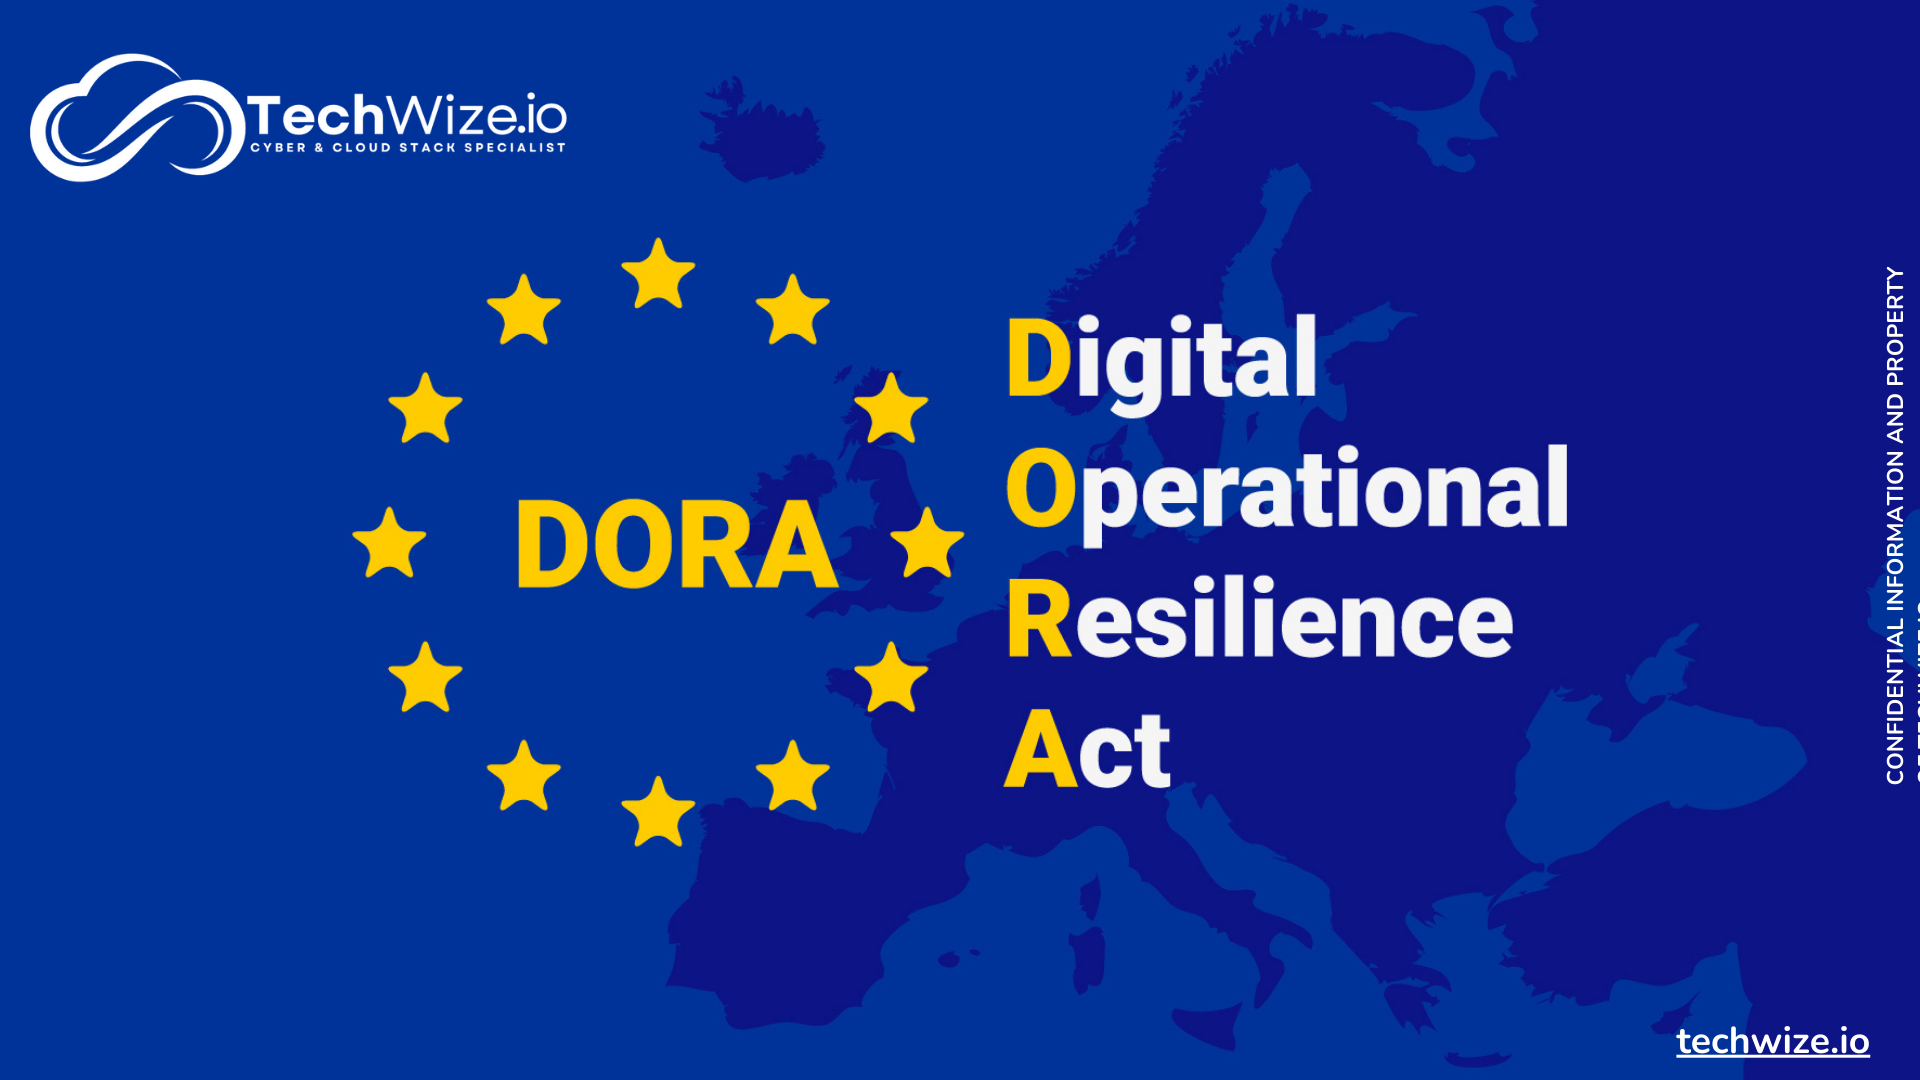 DORA: A response to Cyber Attacks in the financial sector.